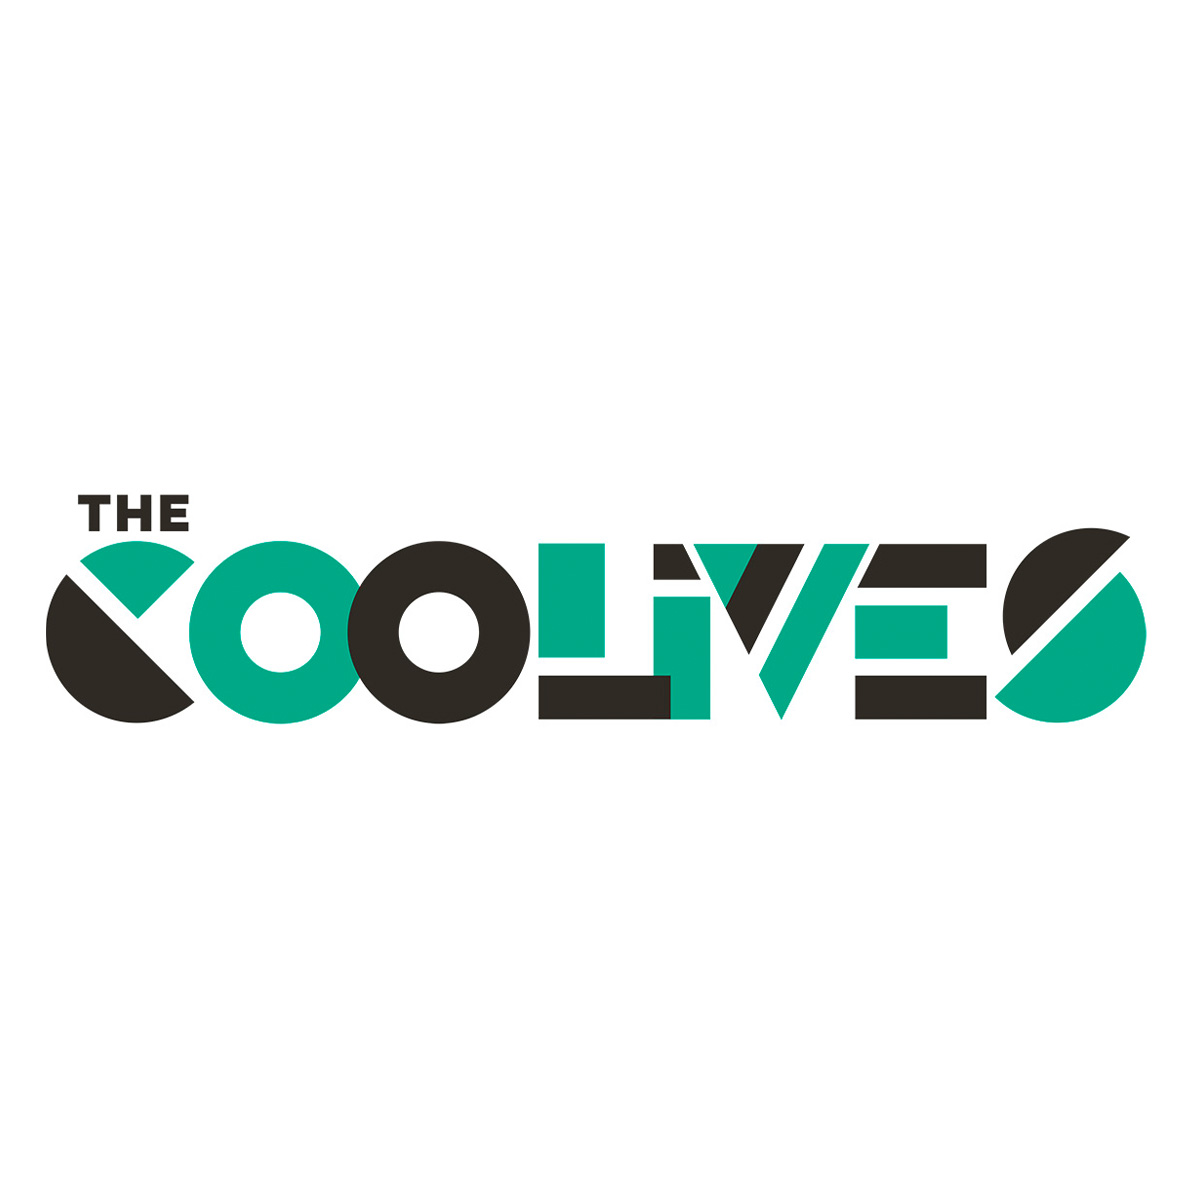 The Coolives